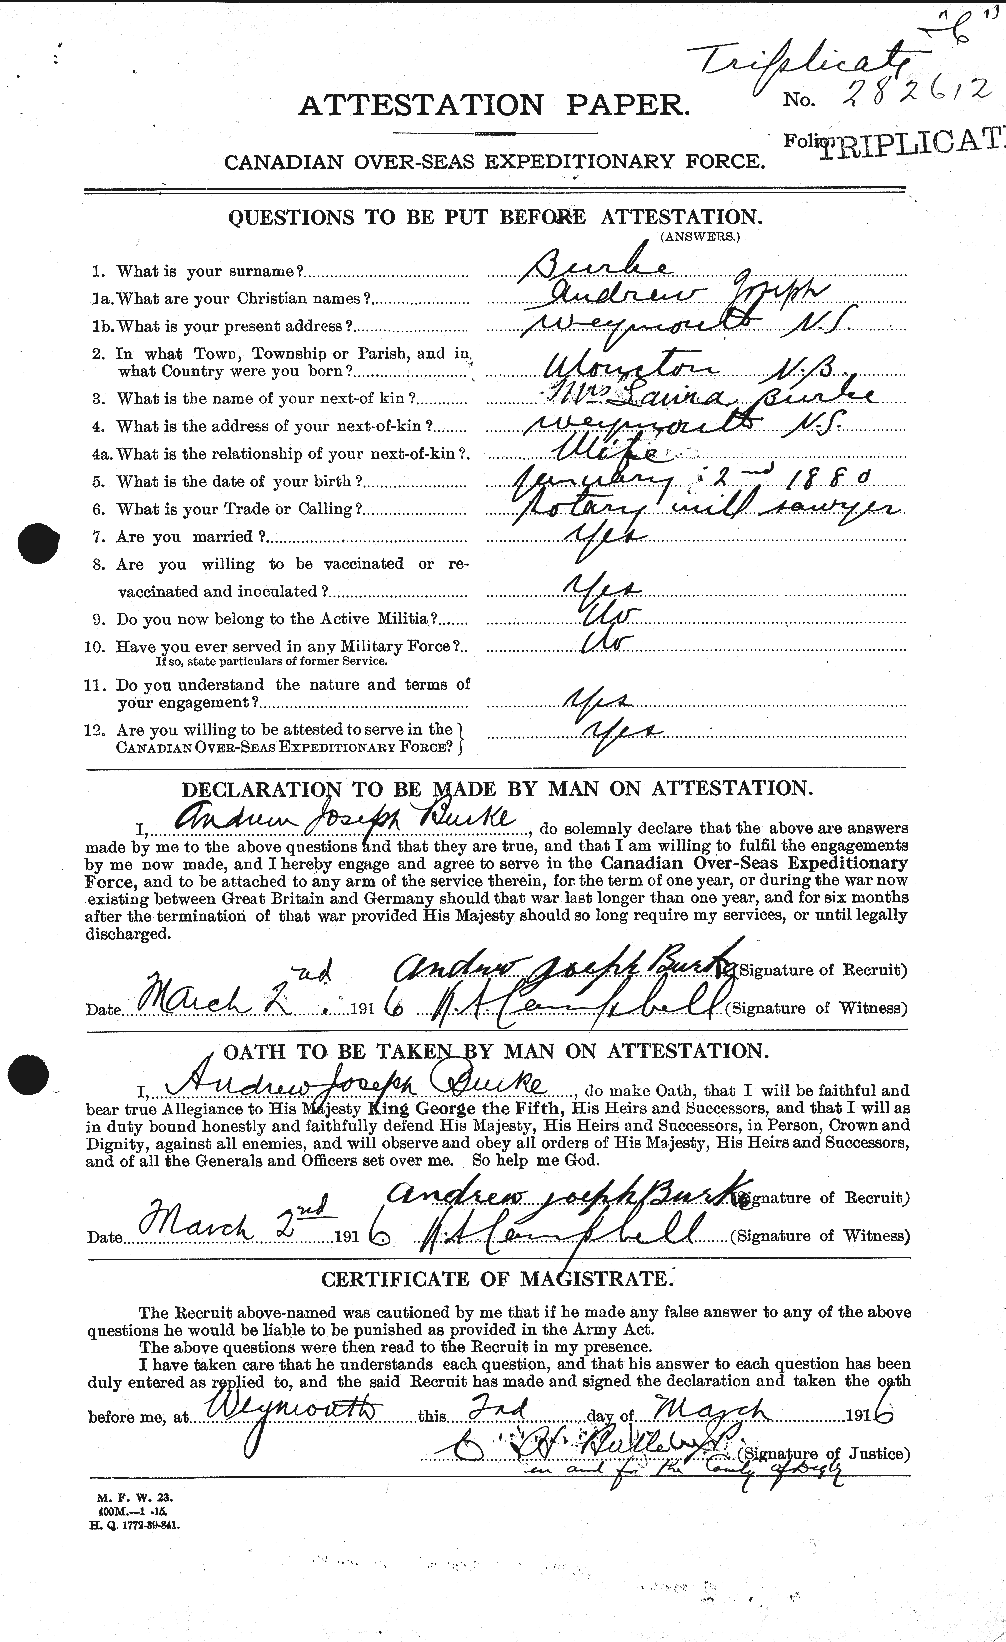 Personnel Records of the First World War - CEF 272372a